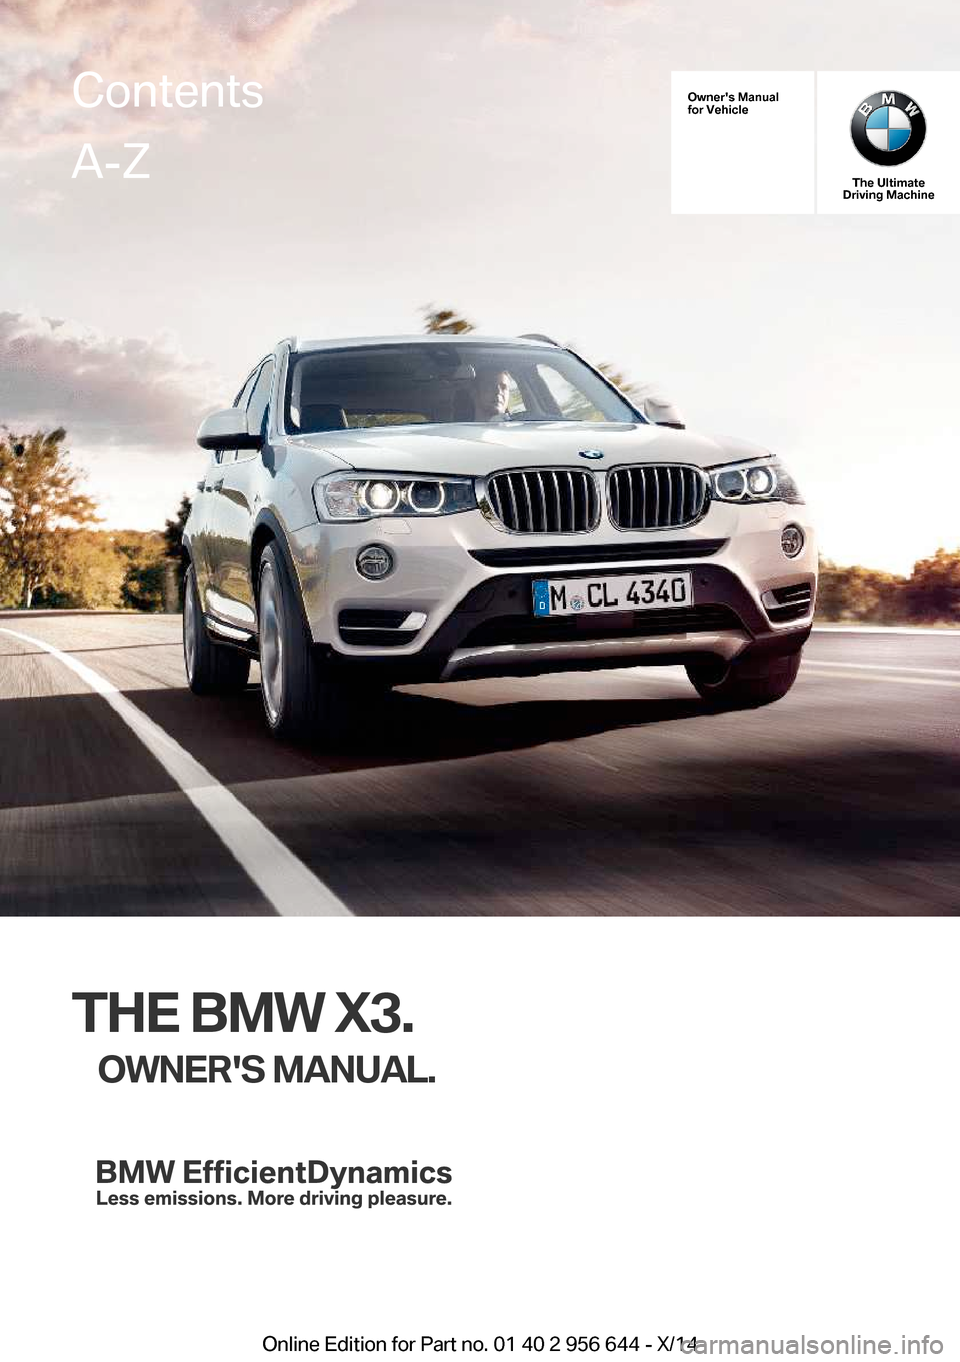 BMW X3 2014 F25 Owners Manual Owners Manual
for Vehicle
The Ultimate
Driving Machine
THE BMW X3.
OWNERS MANUAL.
ContentsA-Z
Online Edition for Part no. 01 40 2 956 644 - X/14   